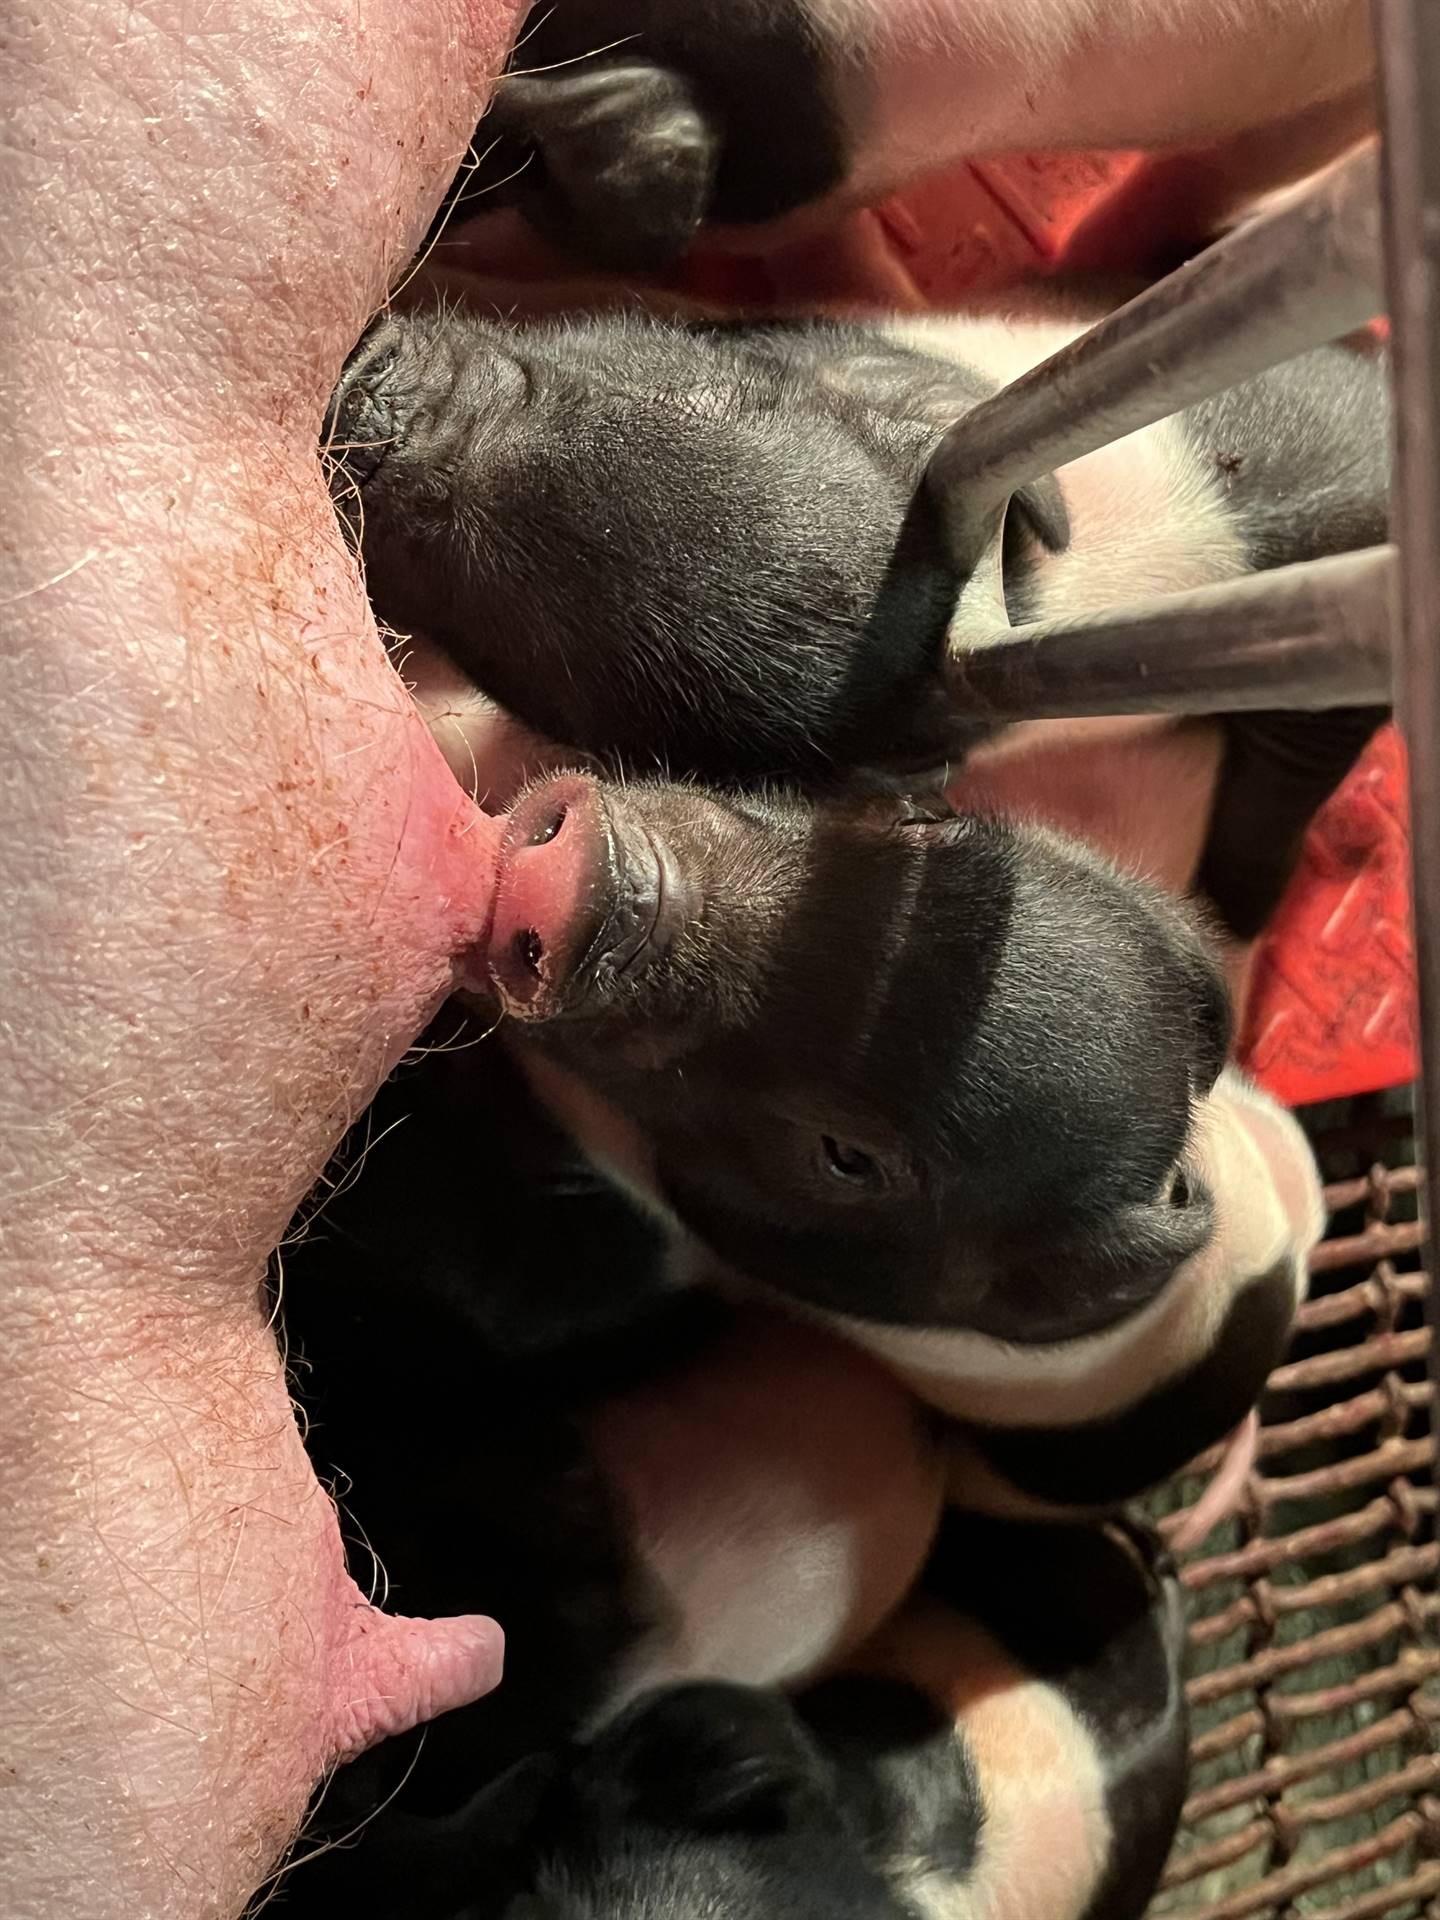 20+ New Piglets born in the Barn 